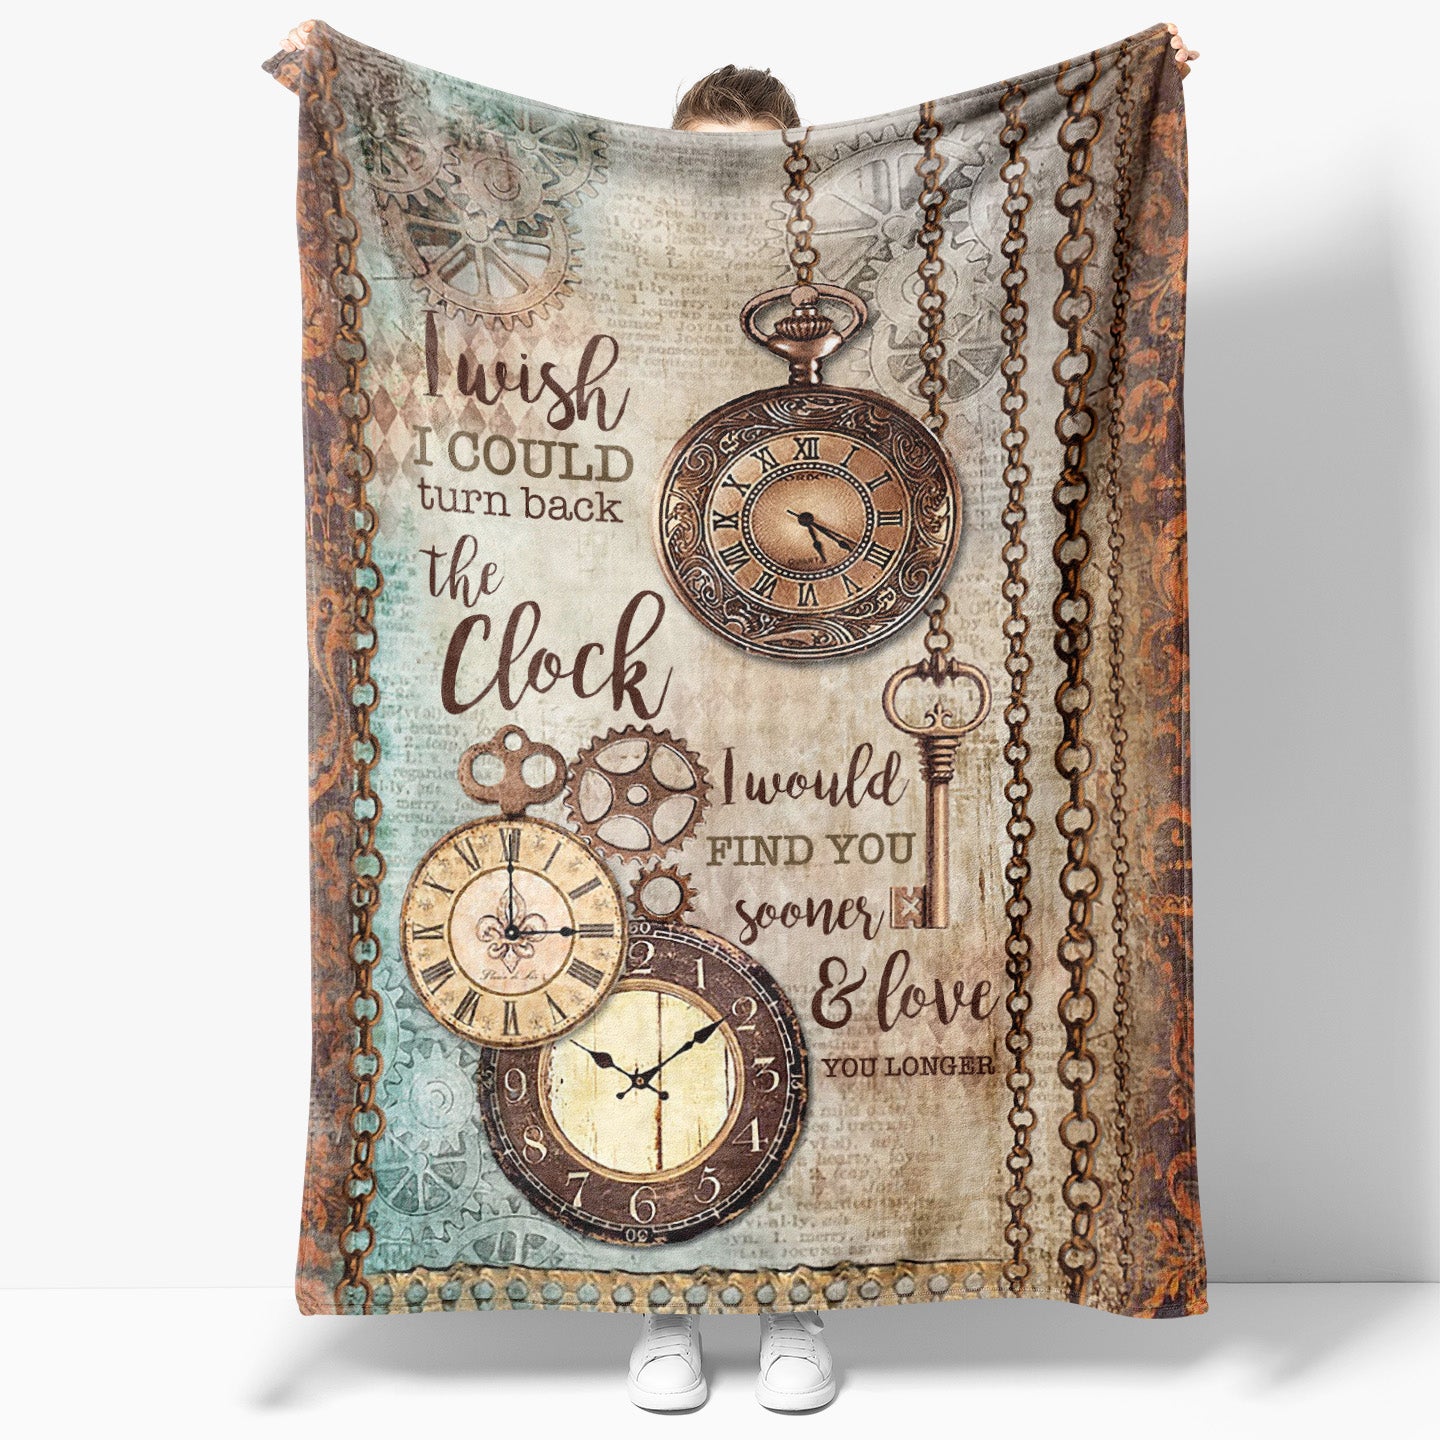 Blanket Gift For Him, Gift For Boyfriend, Valentines Day Gifts For Him, Turn Back the Clock